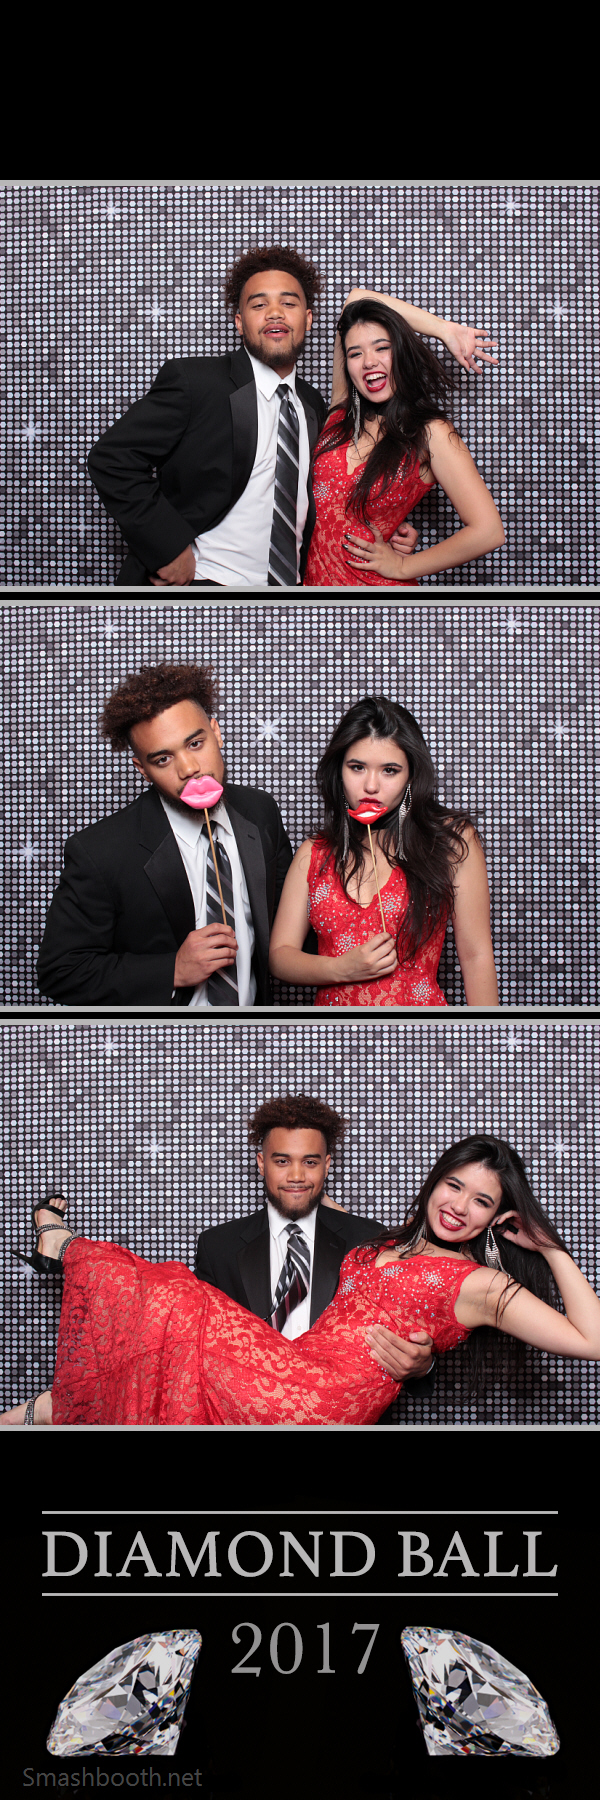 Photo strip of couple posing with props in front of silver shimmer backdrop